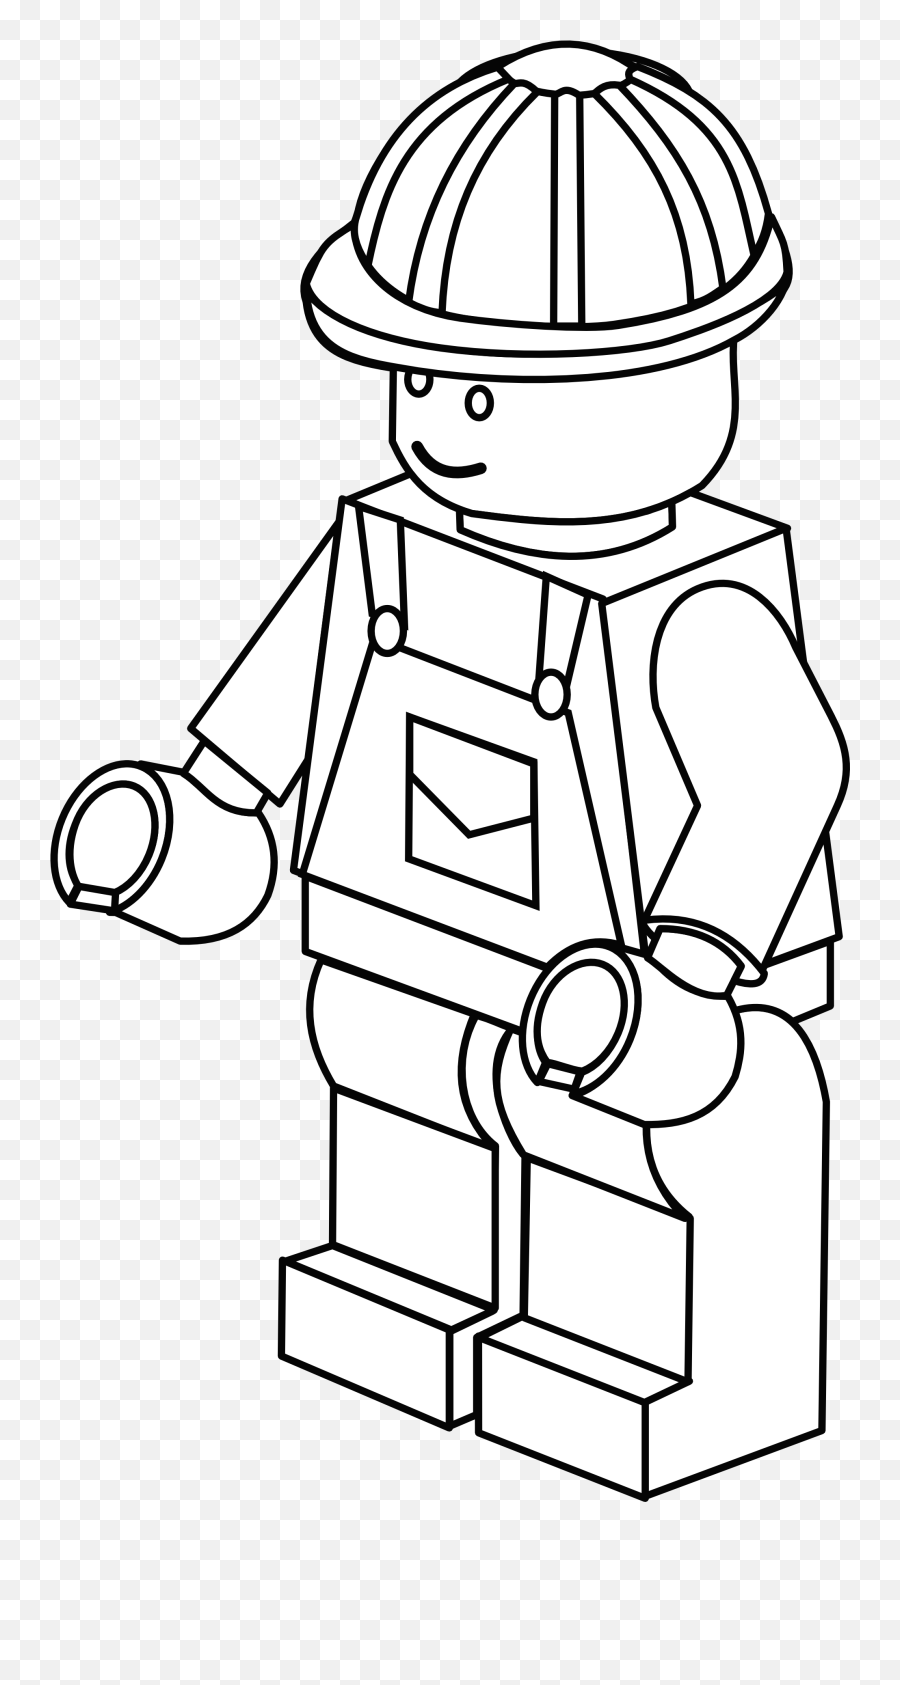 More Complex Lego Figure Colouring - Lego Construction Worker Coloring Emoji,Lego Emotions Coloring Page